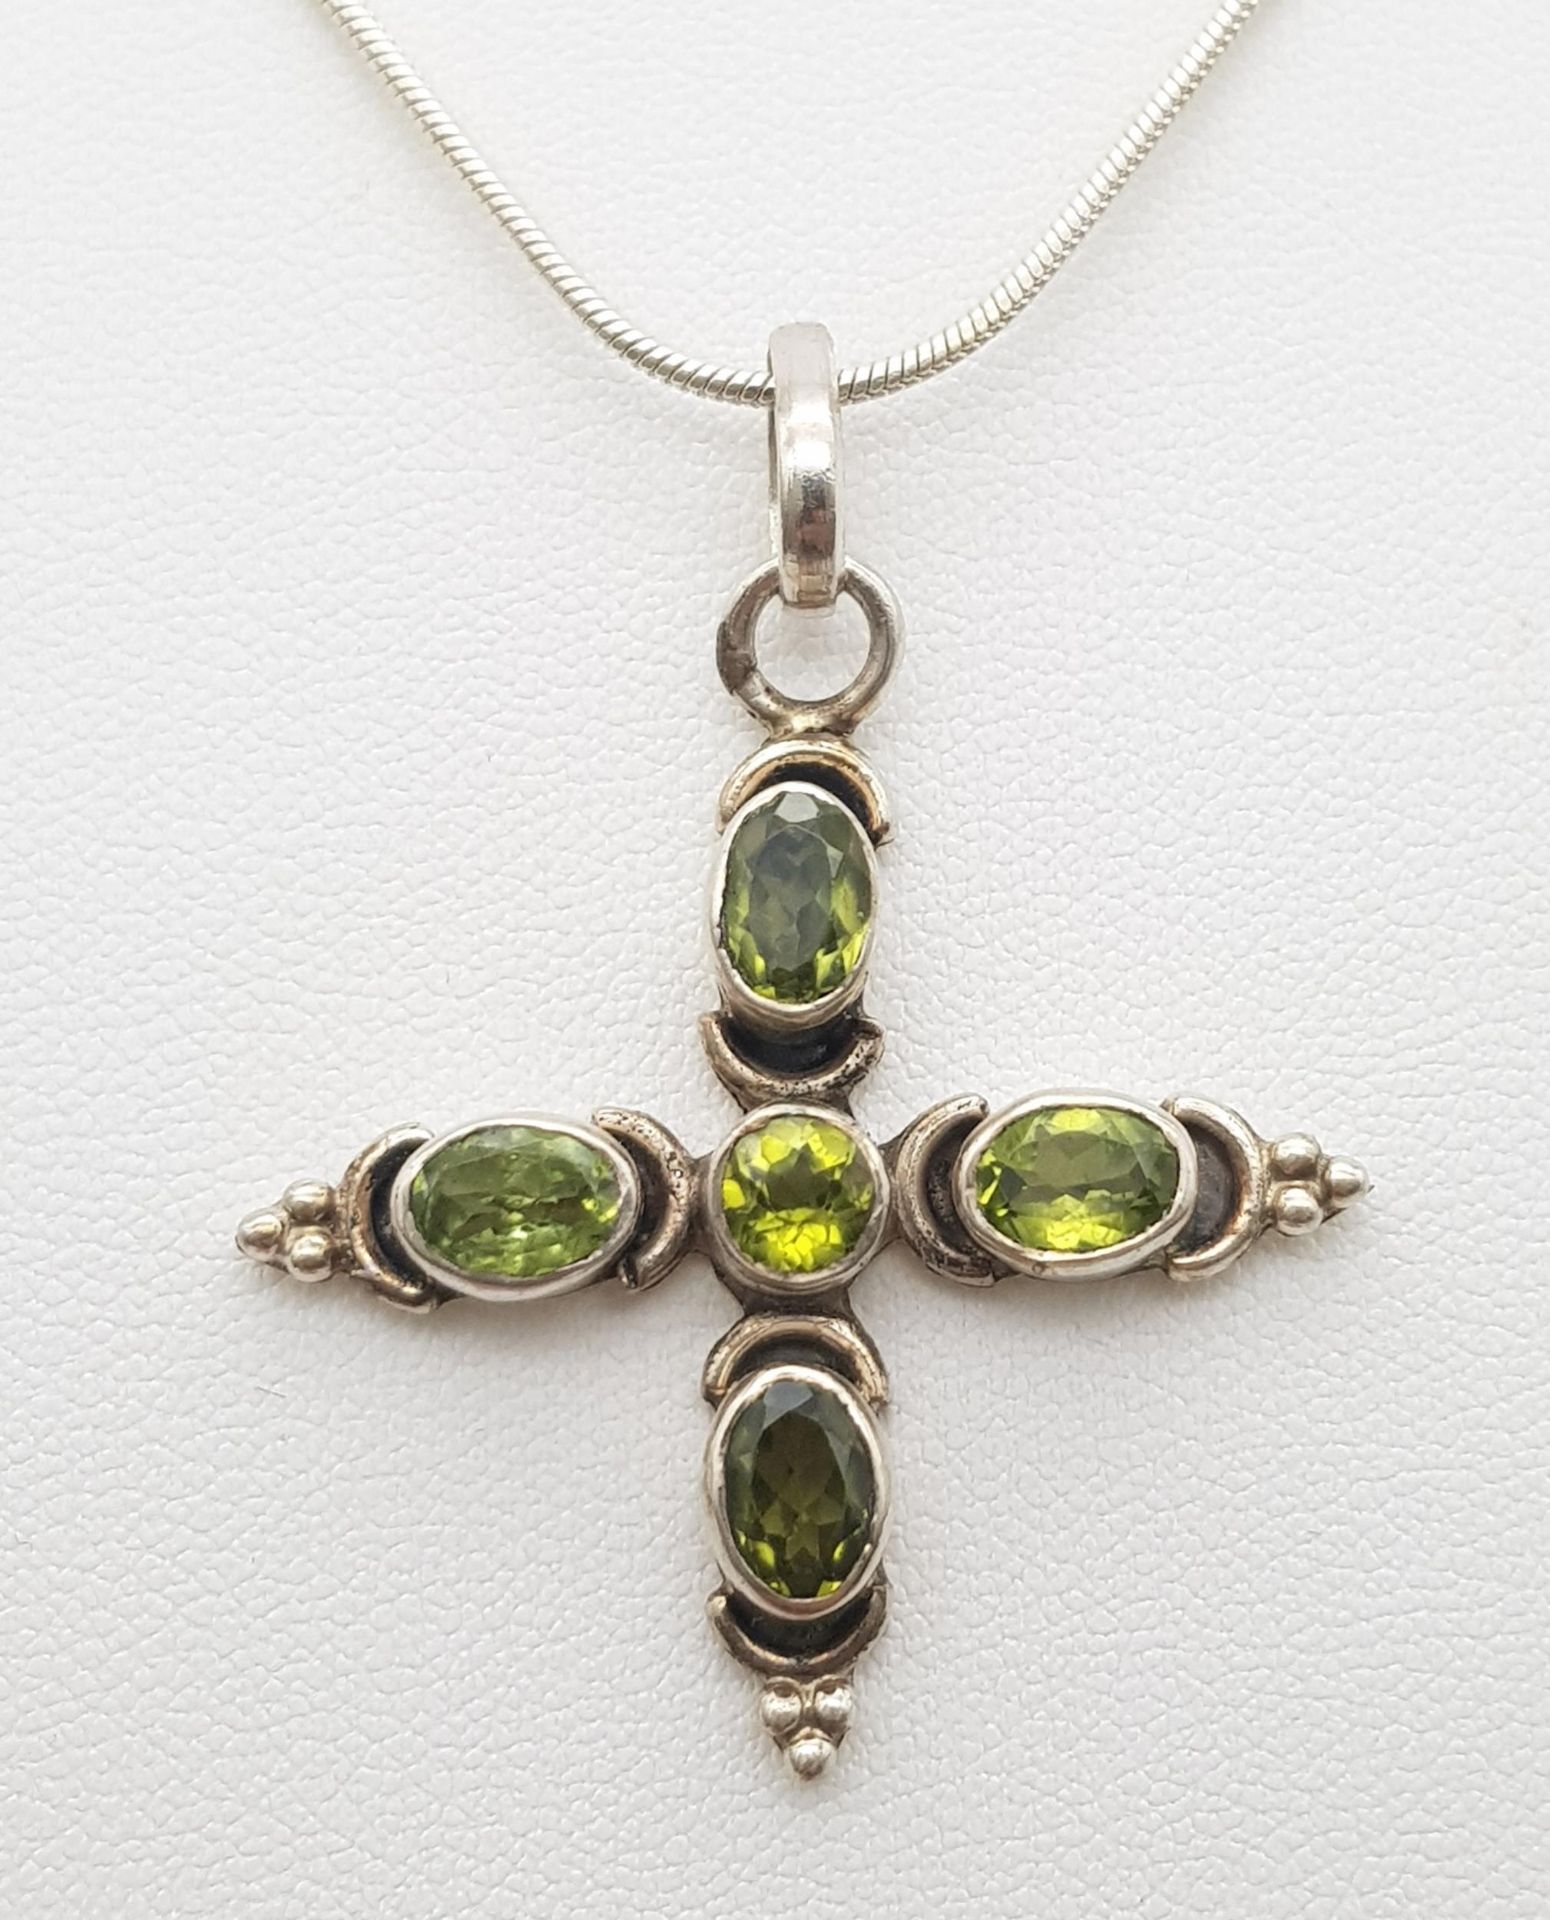 A Vintage Sterling Silver Peridot Set Cross Necklace. 46cm Sterling Silver Rope Chain. Pendant - Image 3 of 5